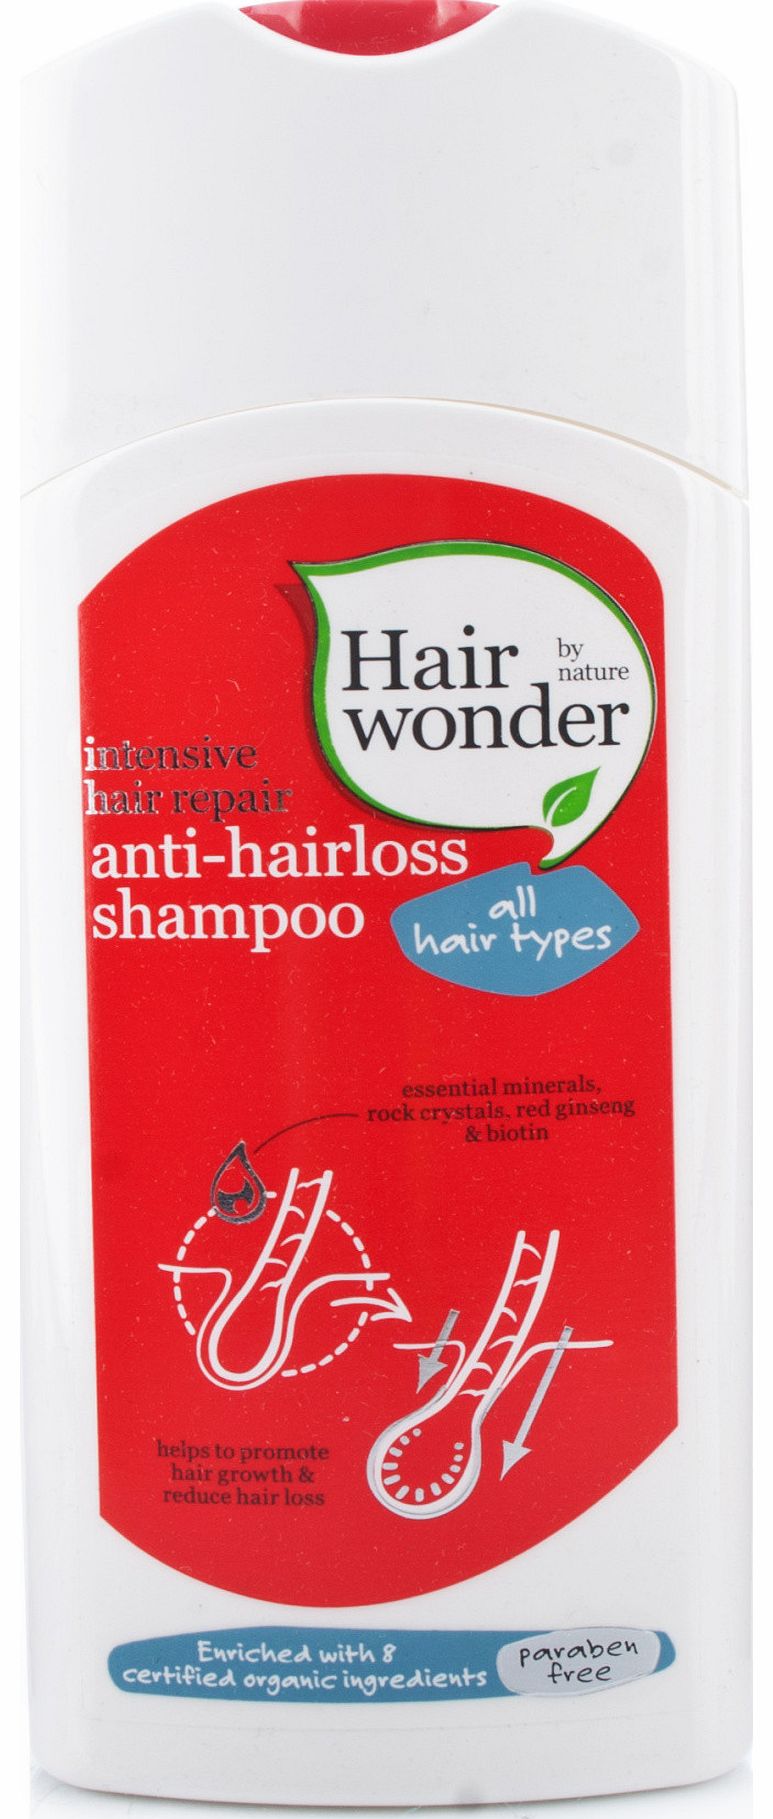 Hair Wonder Anti-Hairloss Shampoo improves strength and condition with intensive hair repair formula. This shampoo helps to reduce hair loss and promote hair growth creating volume, thickness and texture. Enriched with 8 certified organic ingredients